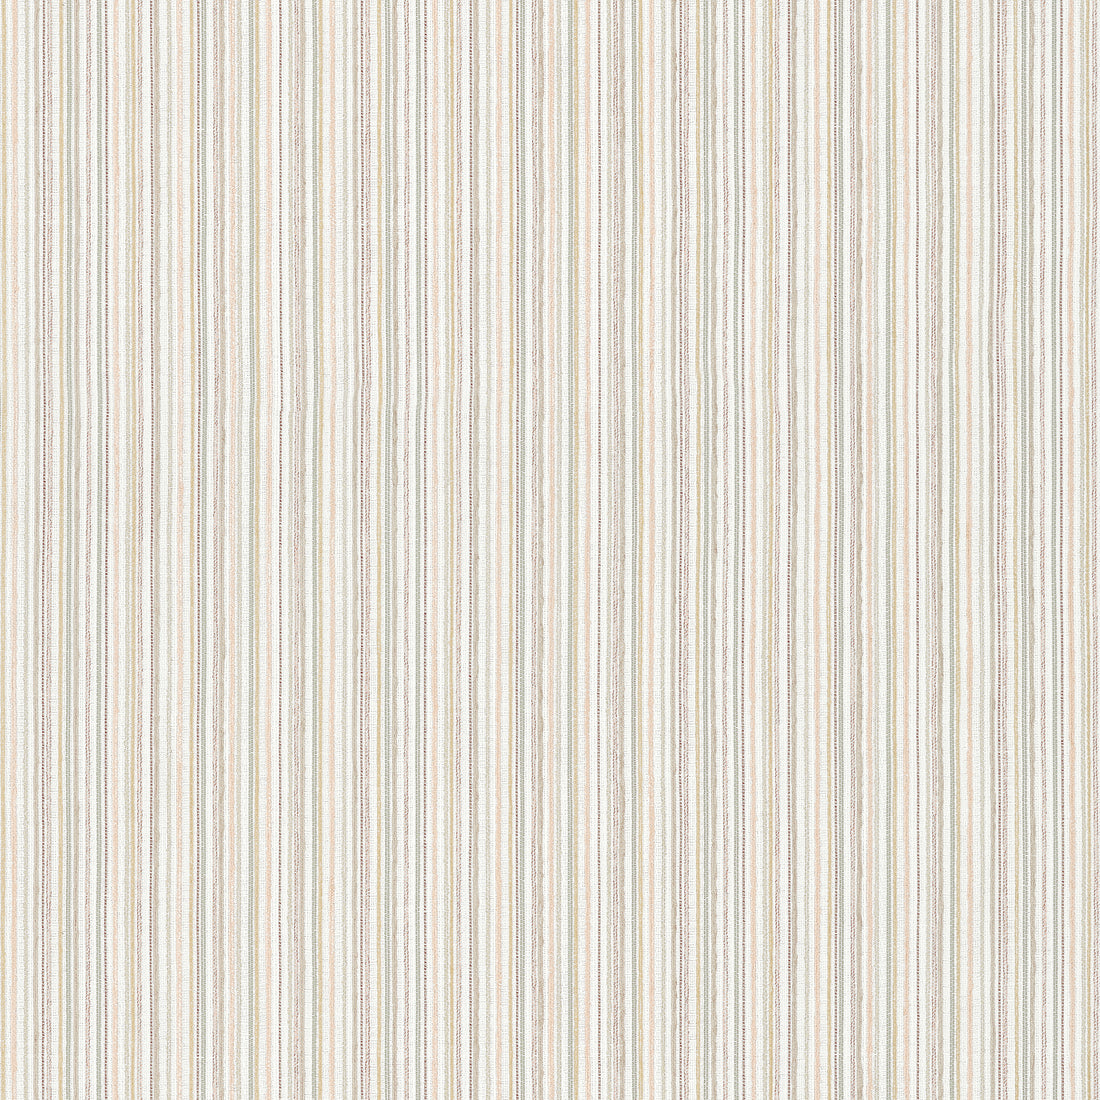 Ernie Stripe fabric in sweet pea color - pattern number W81941 - by Thibaut in the Companions collection